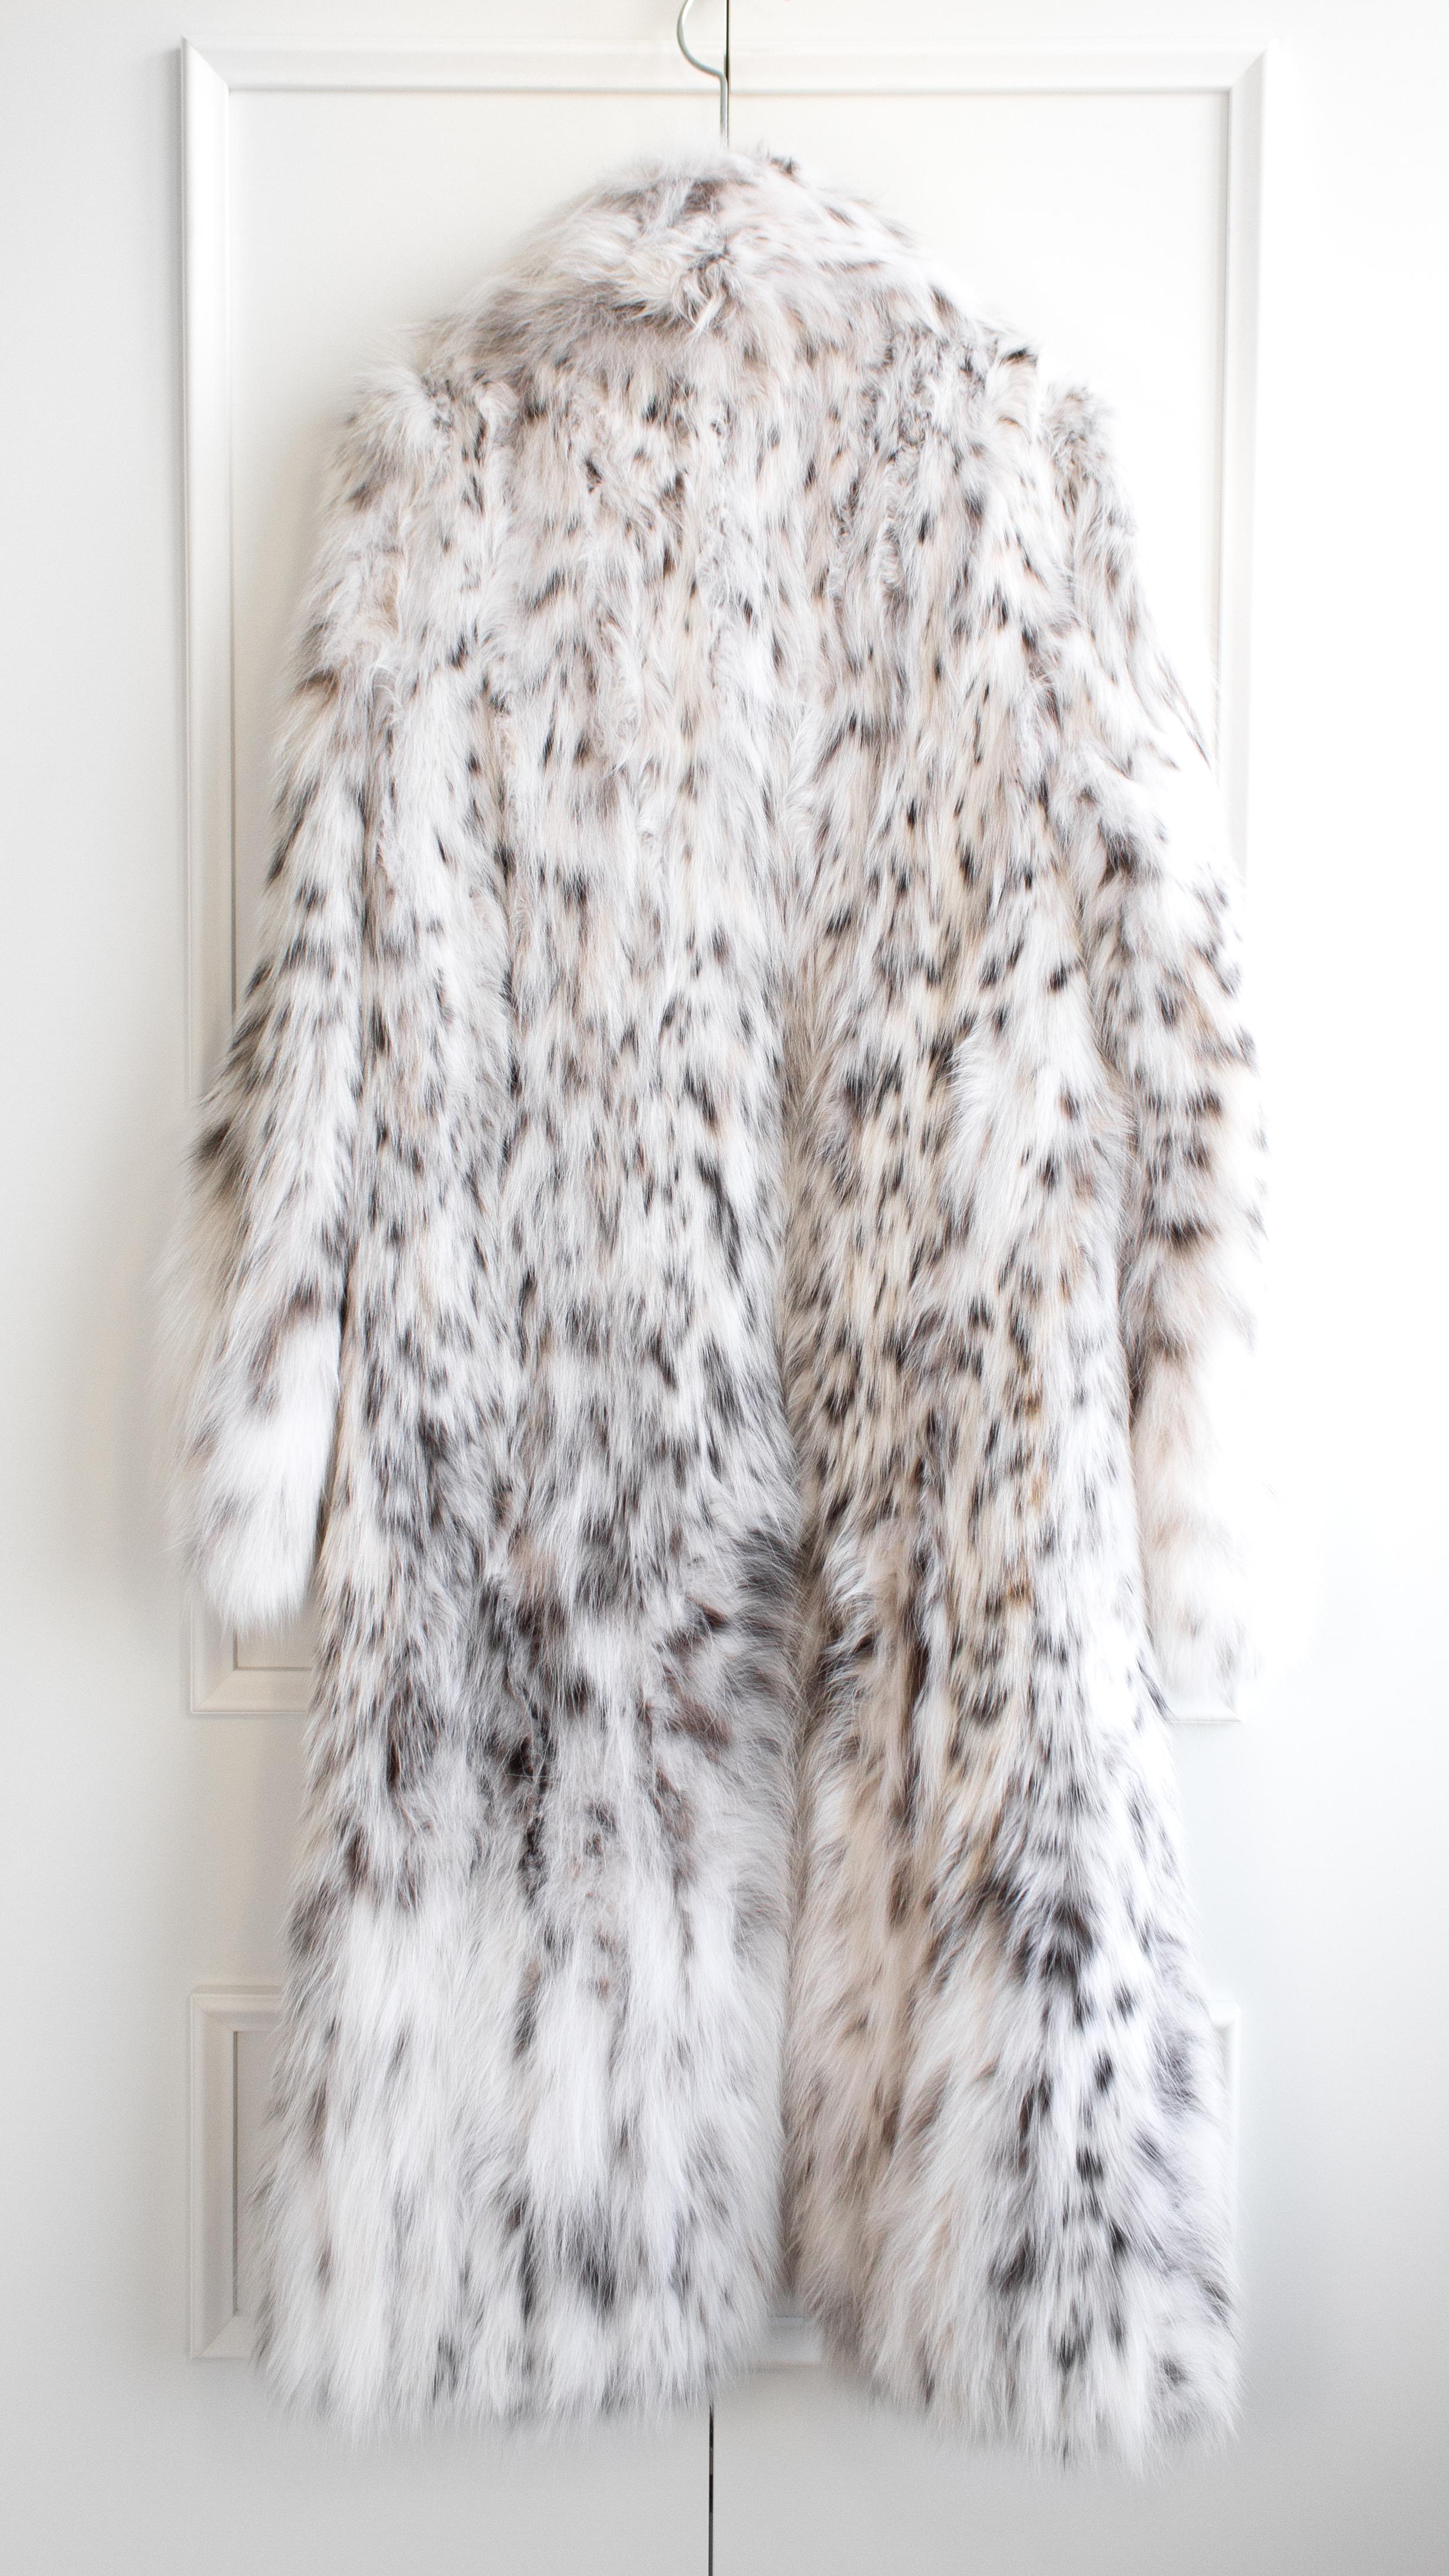 Finest North American White Lynx Belly Full Length Hood Fur Coat In Excellent Condition For Sale In Jersey City, NJ